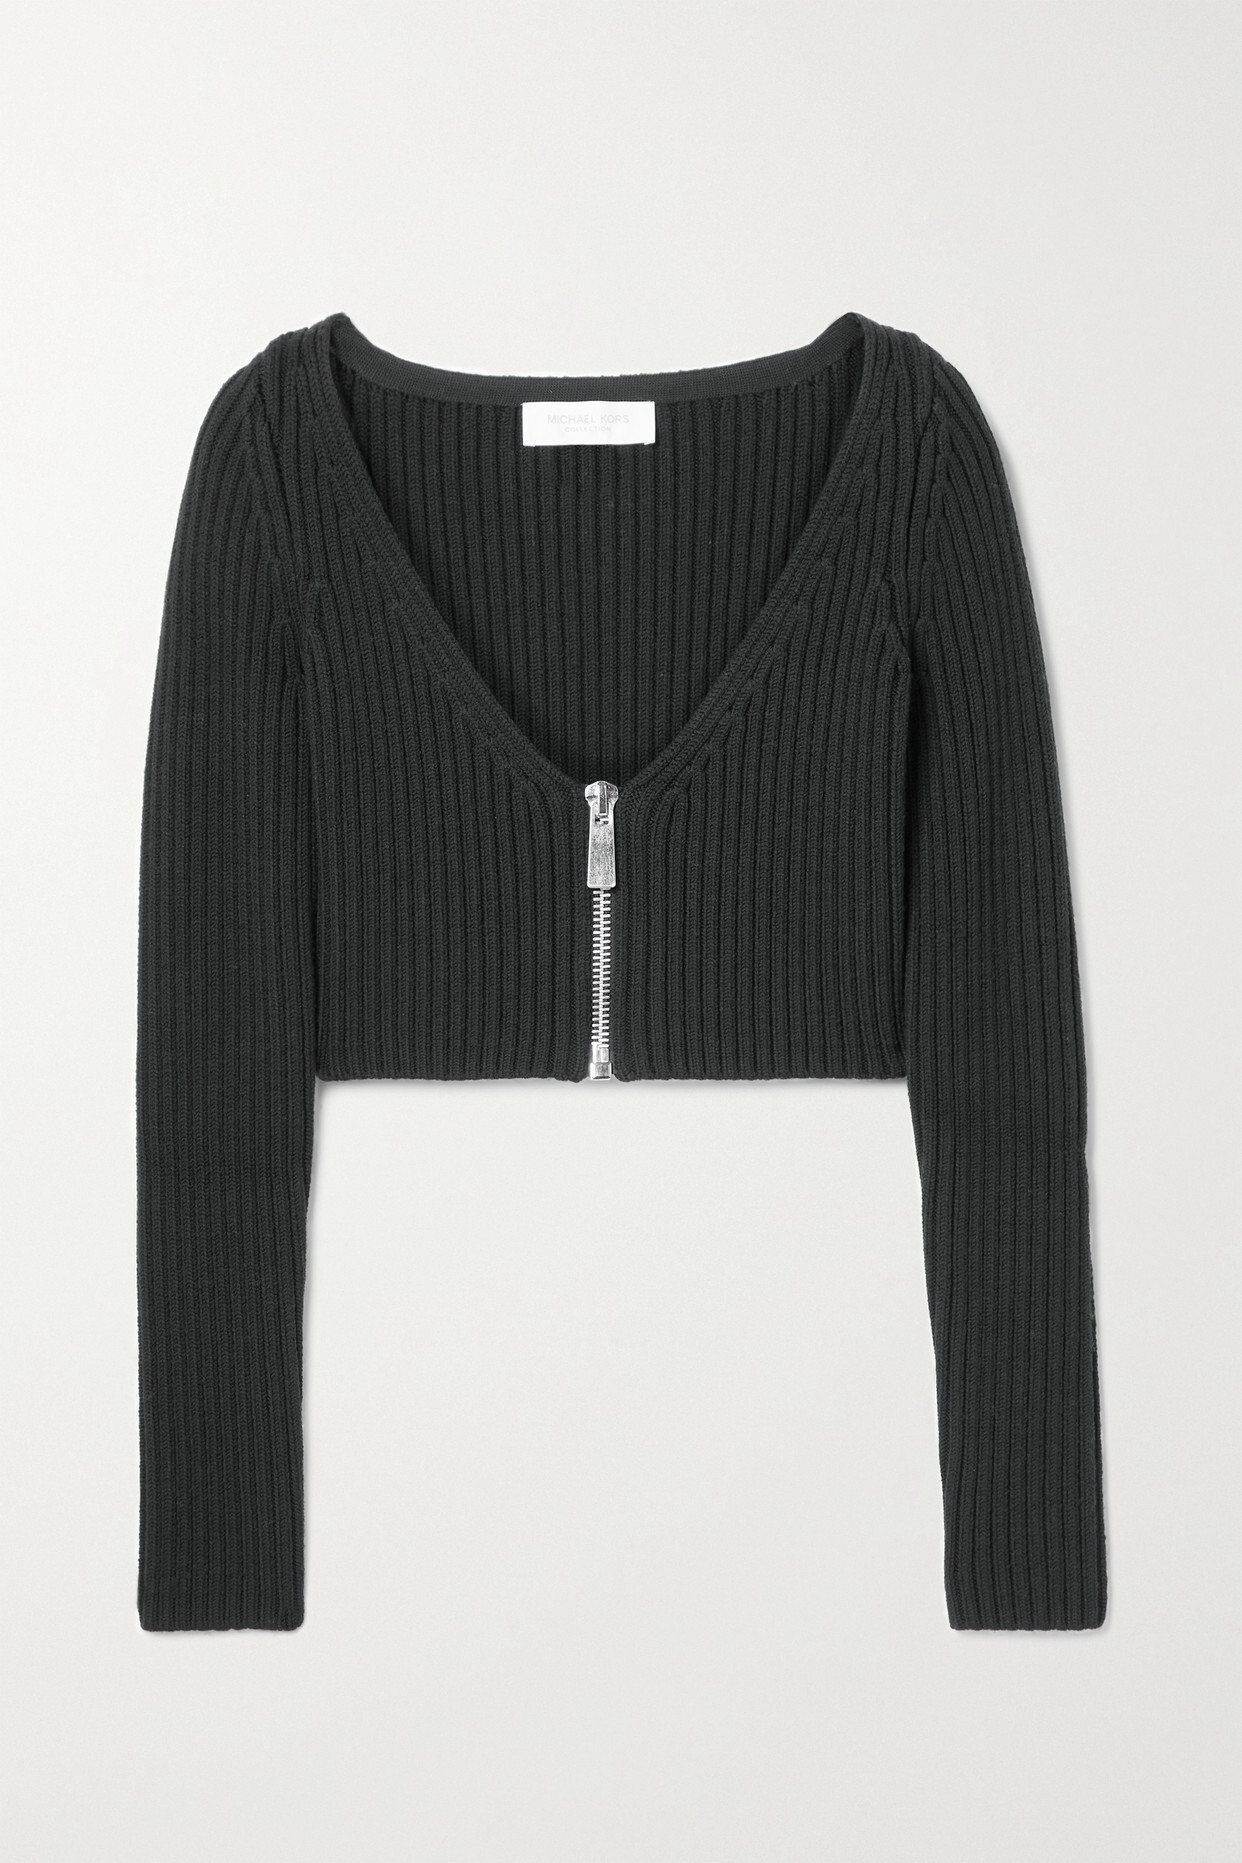 Michael Kors Collection - Cropped Ribbed Wool-blend Cardigan - Black